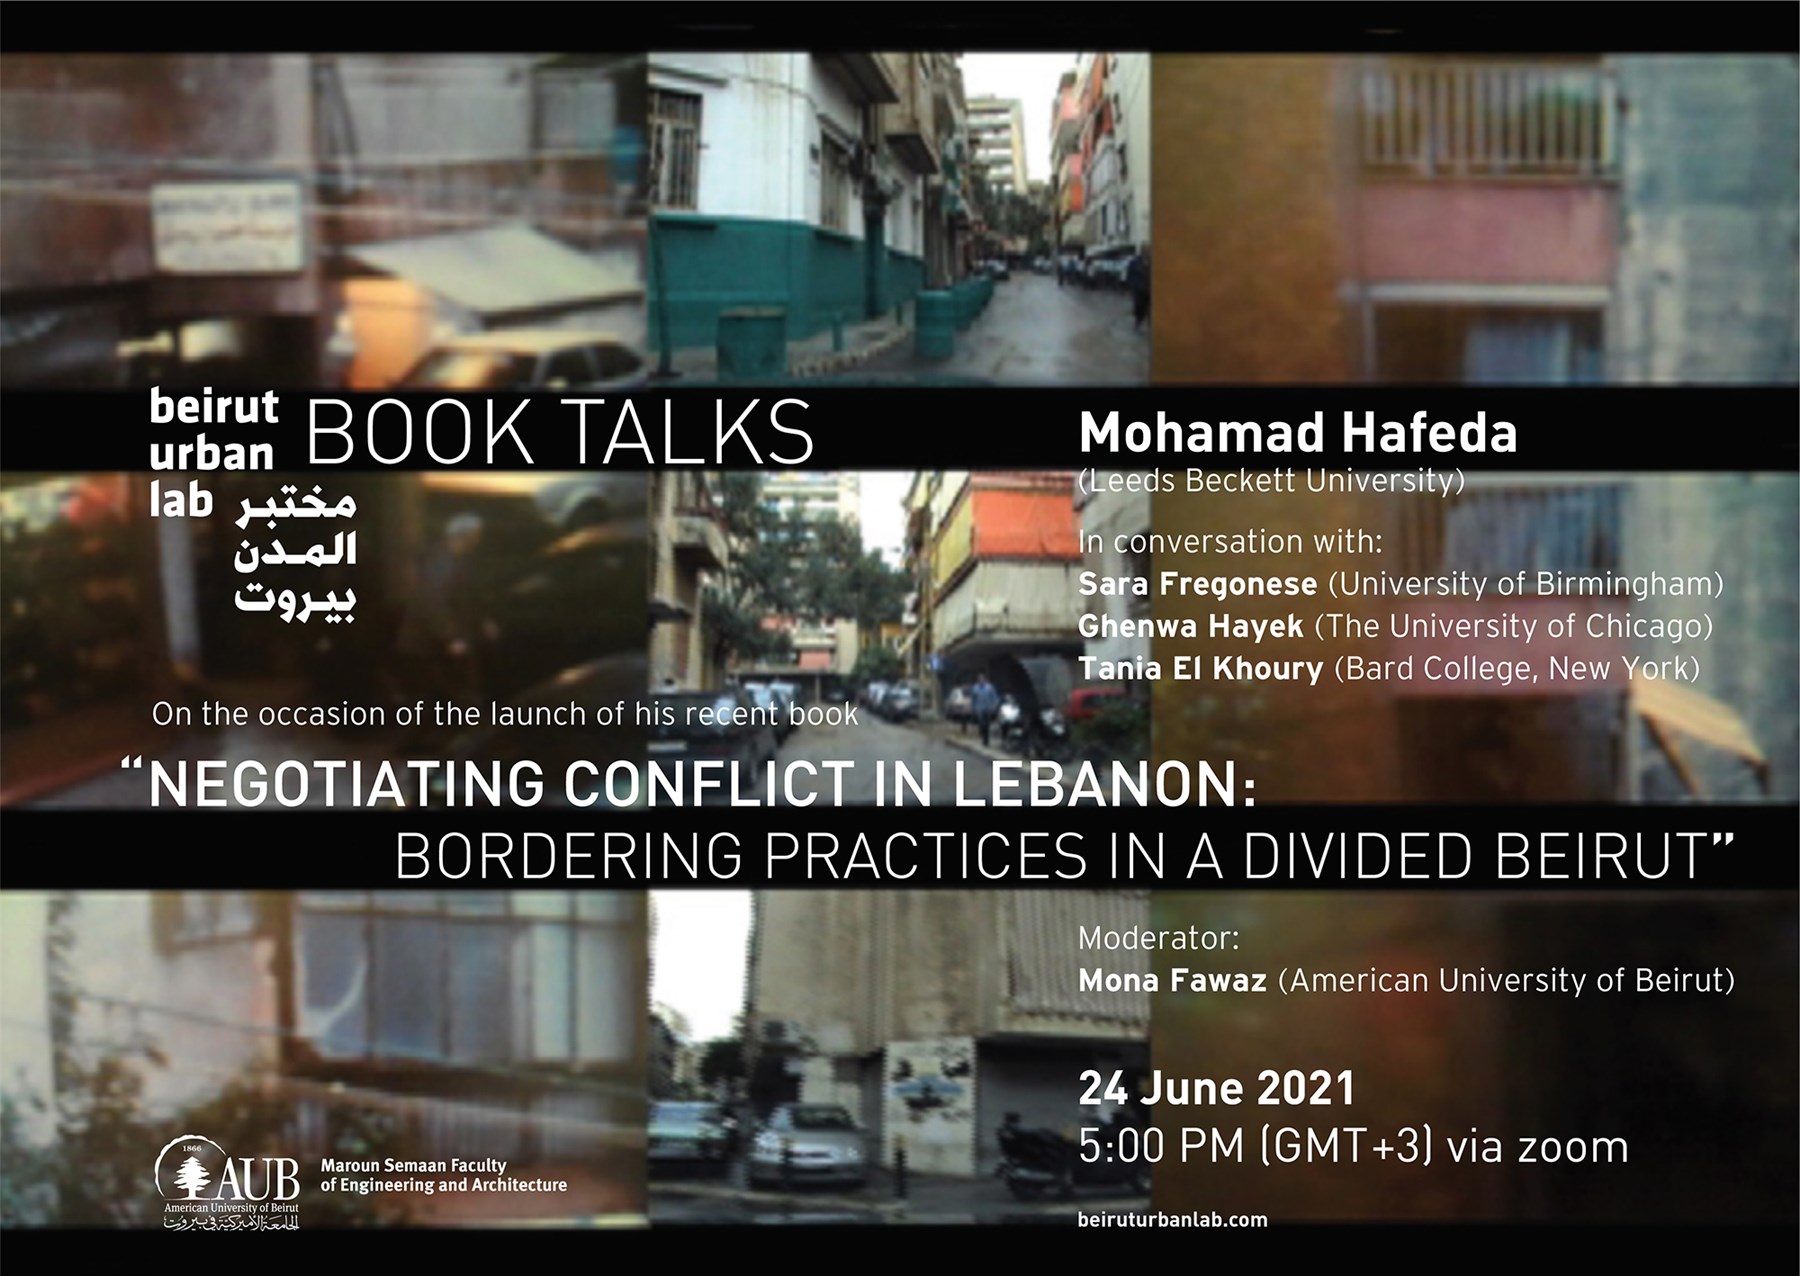 Negotiating Conflict in Lebanon: Bordering Practices in A Divided Beirut